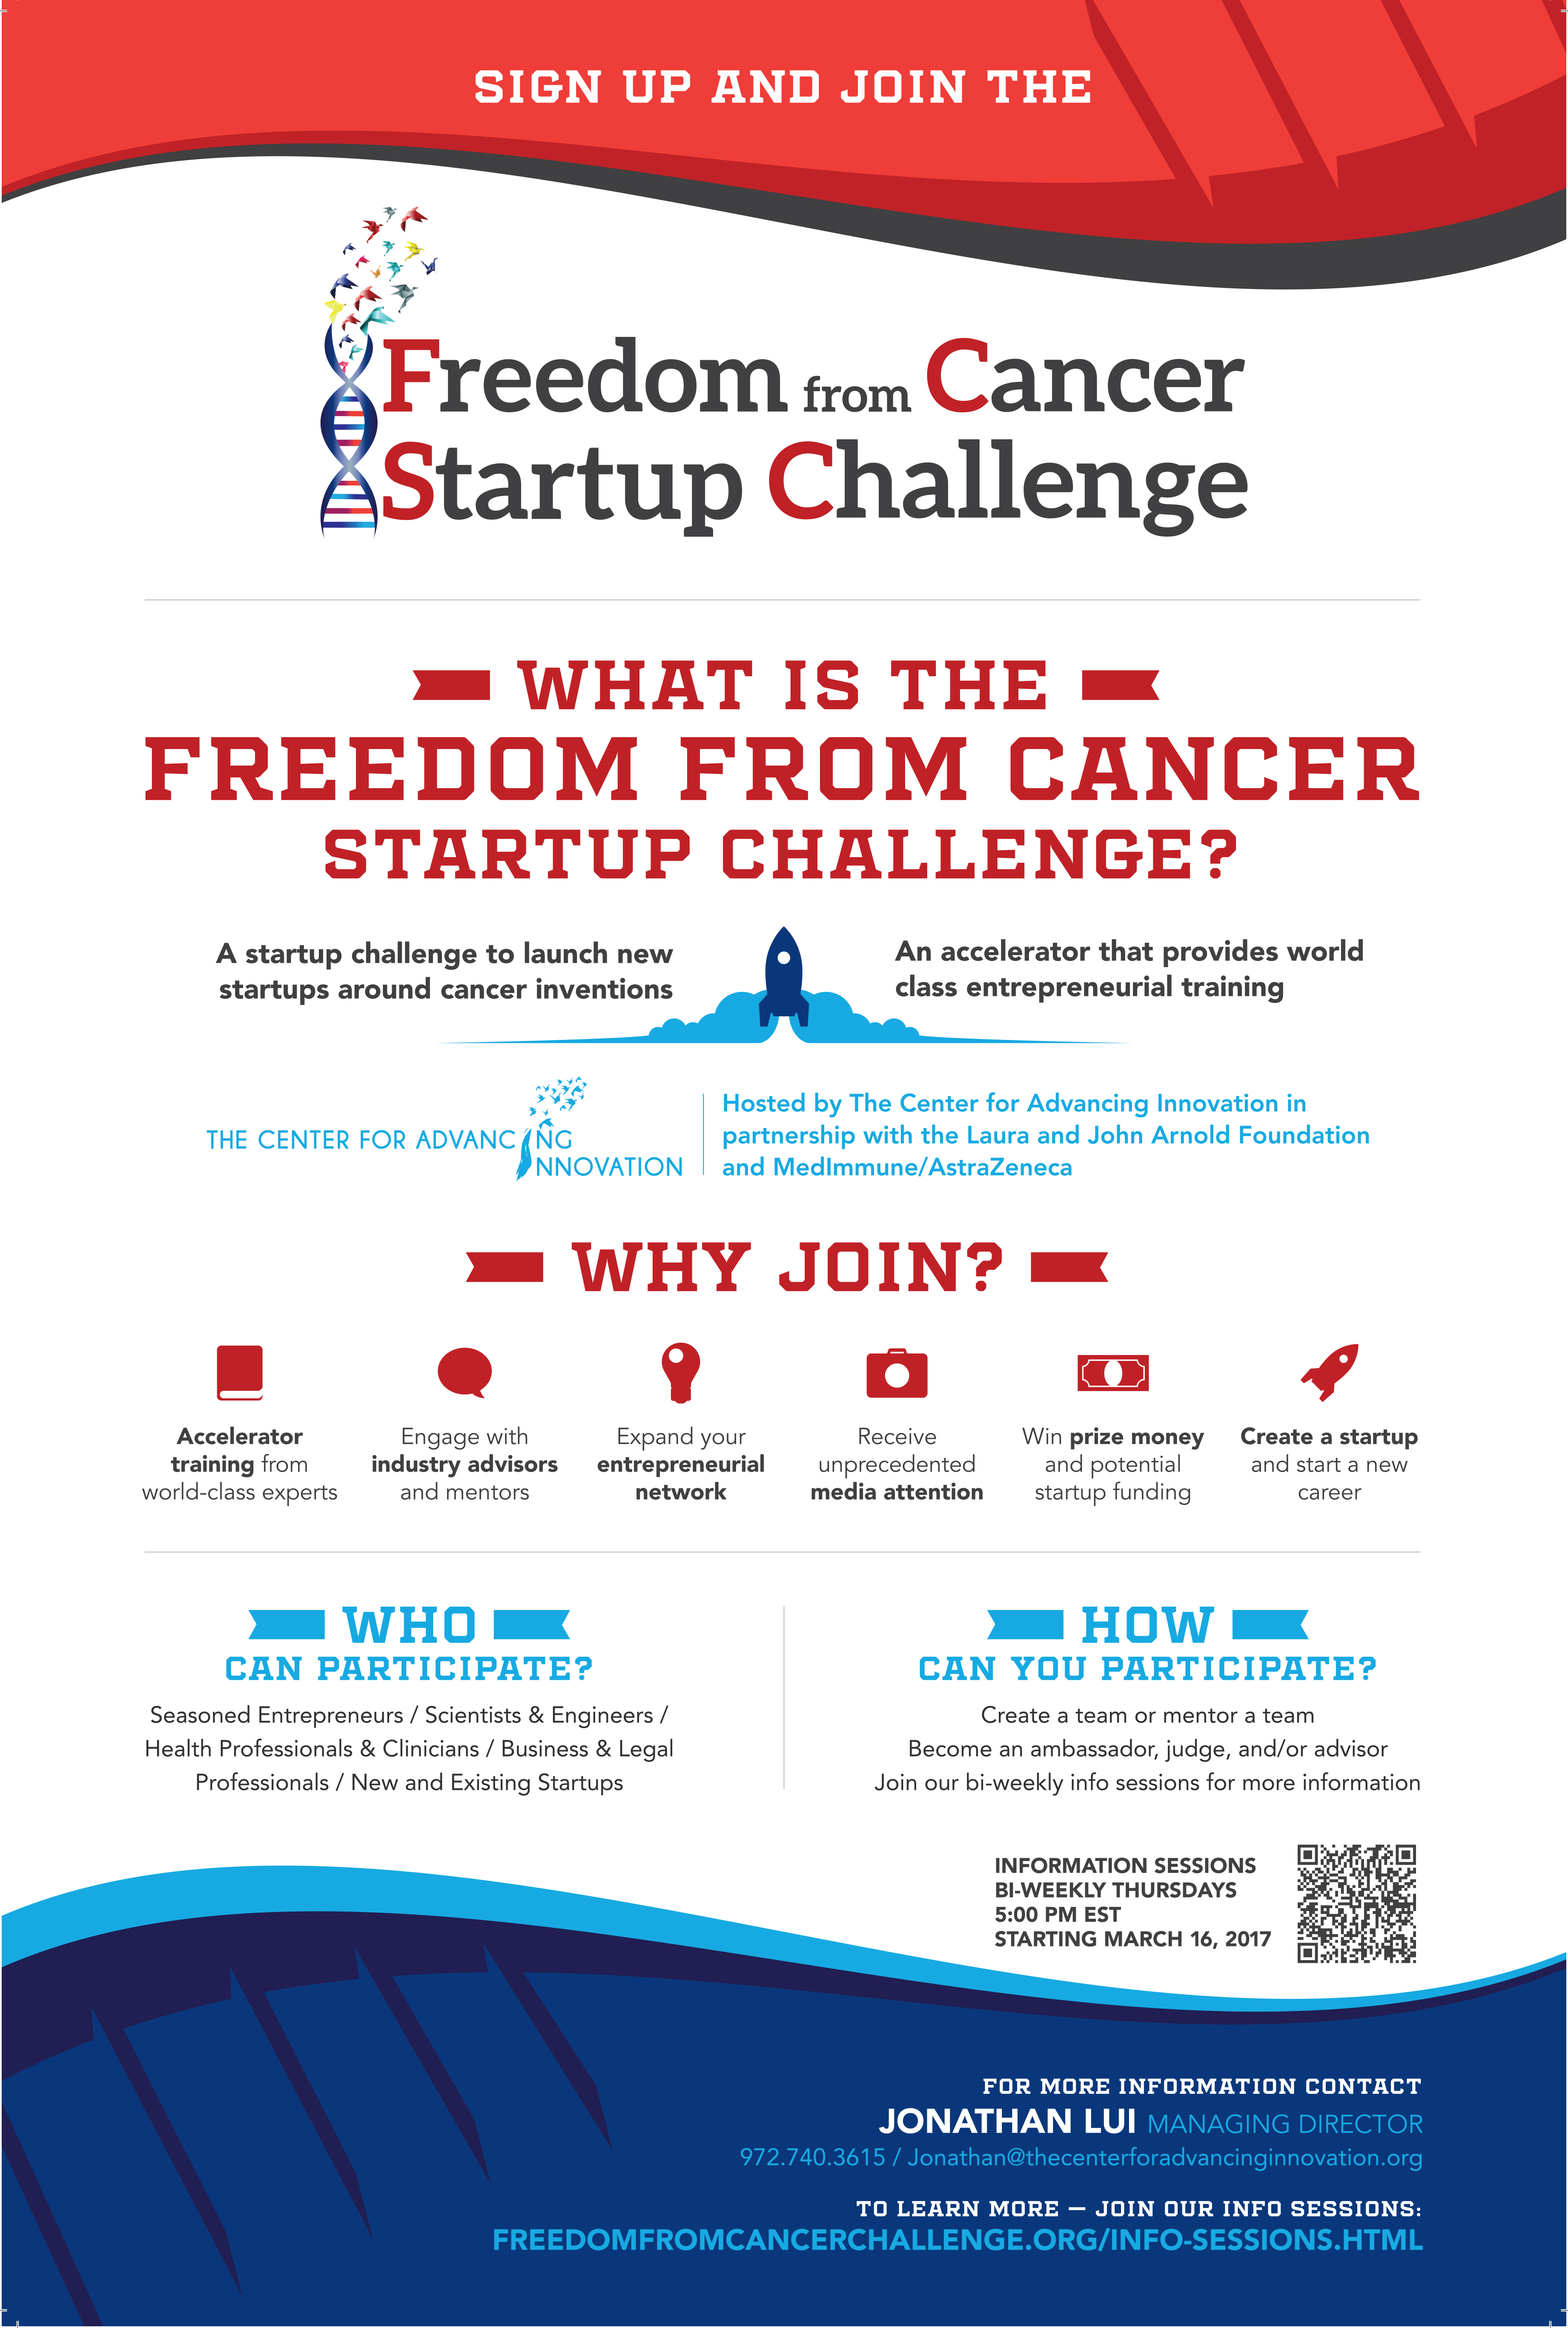 Freedom from Cancer Startup Challenge flyer